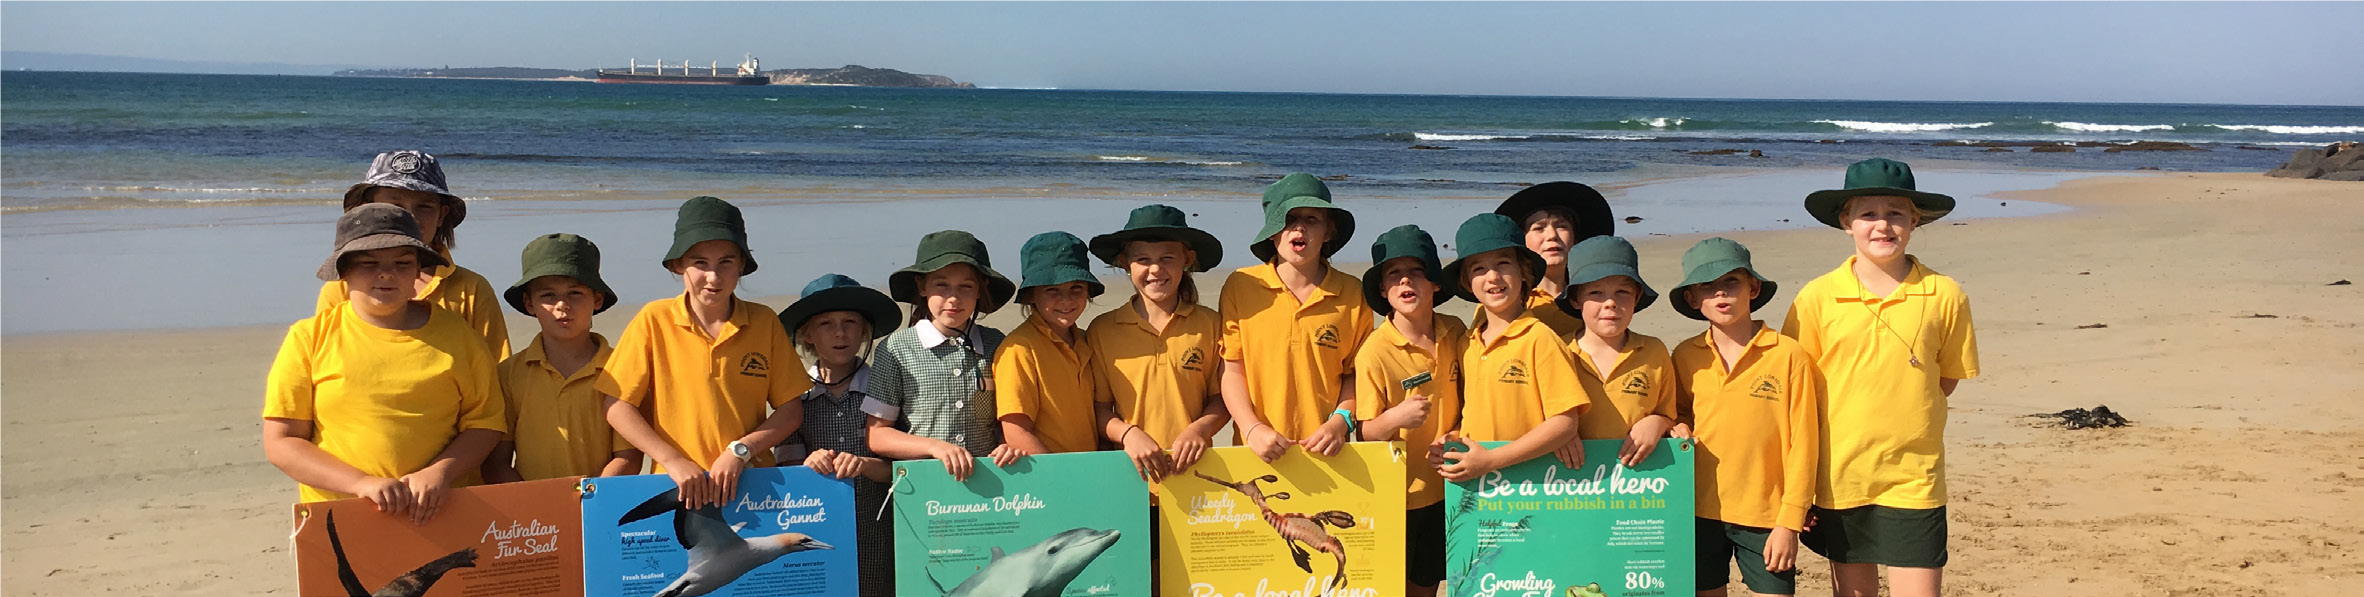 Image shows children on a beach holding marine images